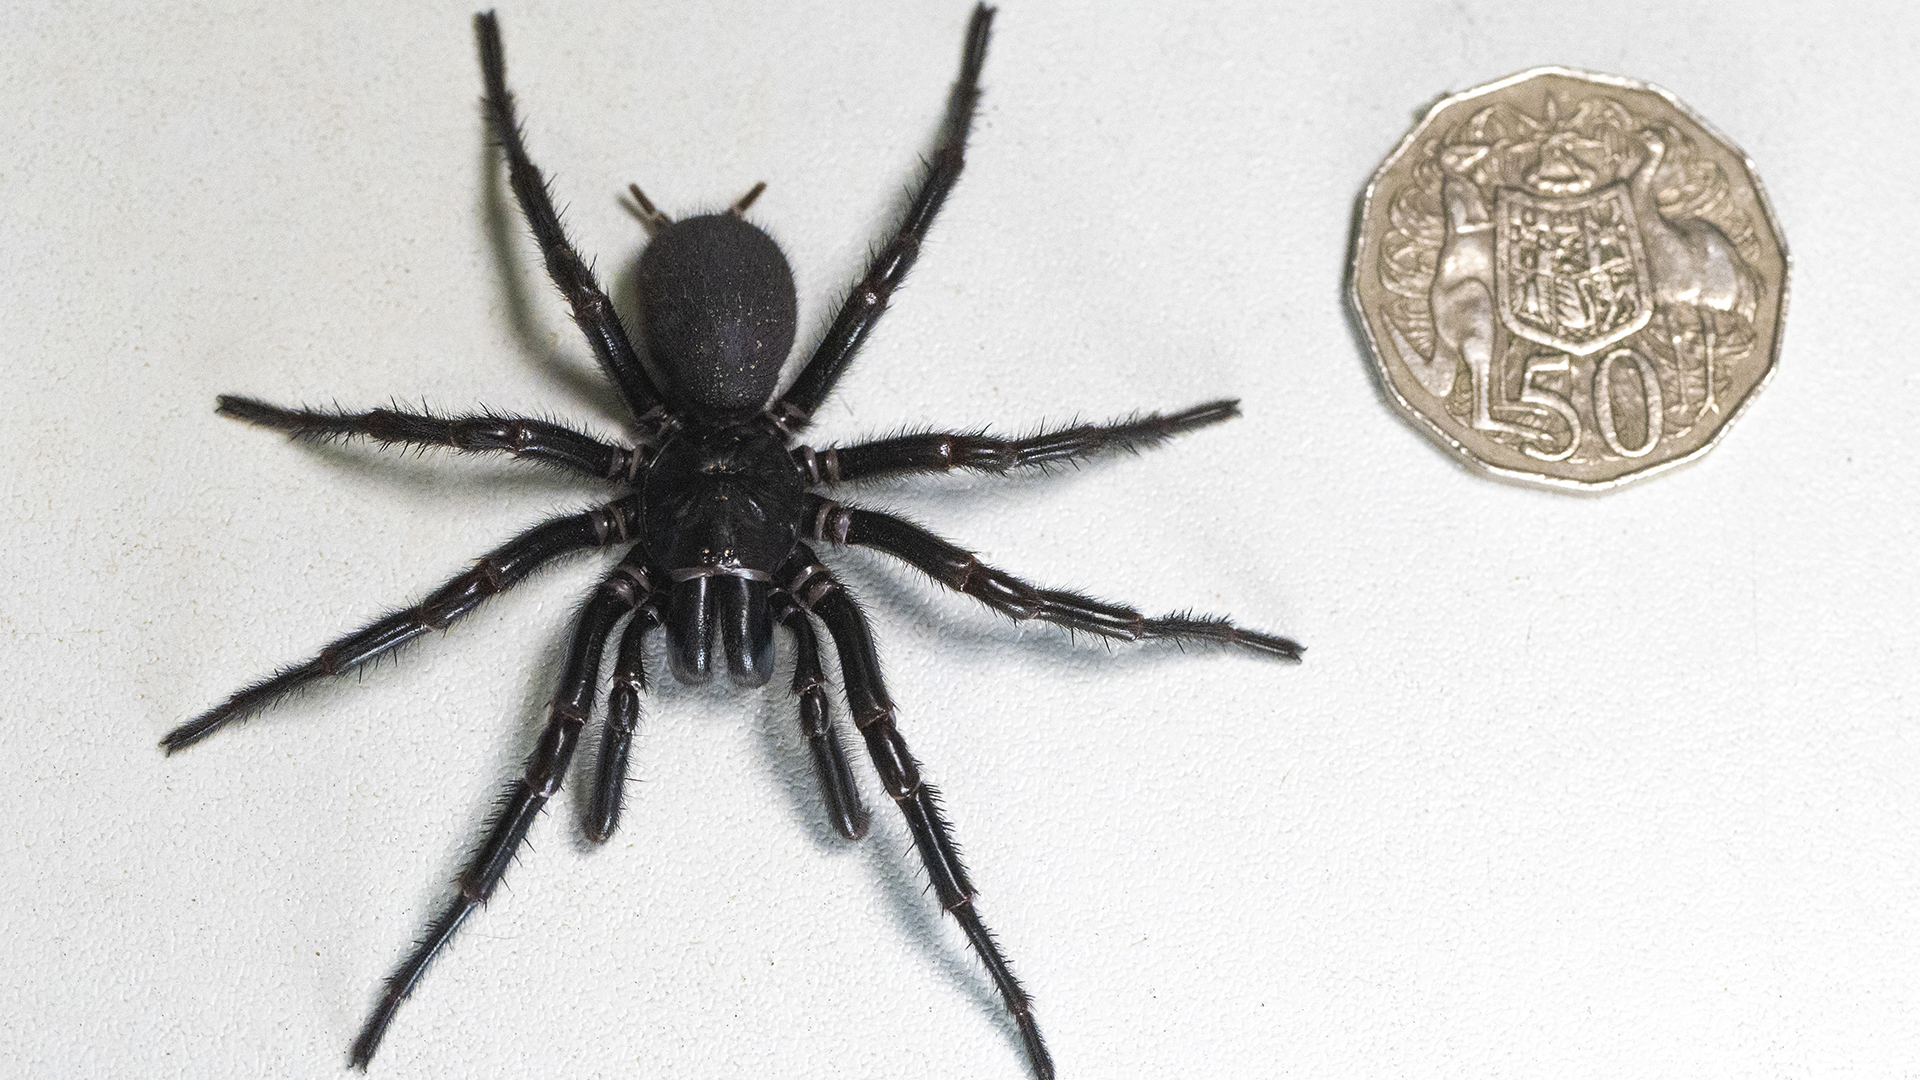 “No”… The largest male specimen of the most venomous spider has been found in Australia